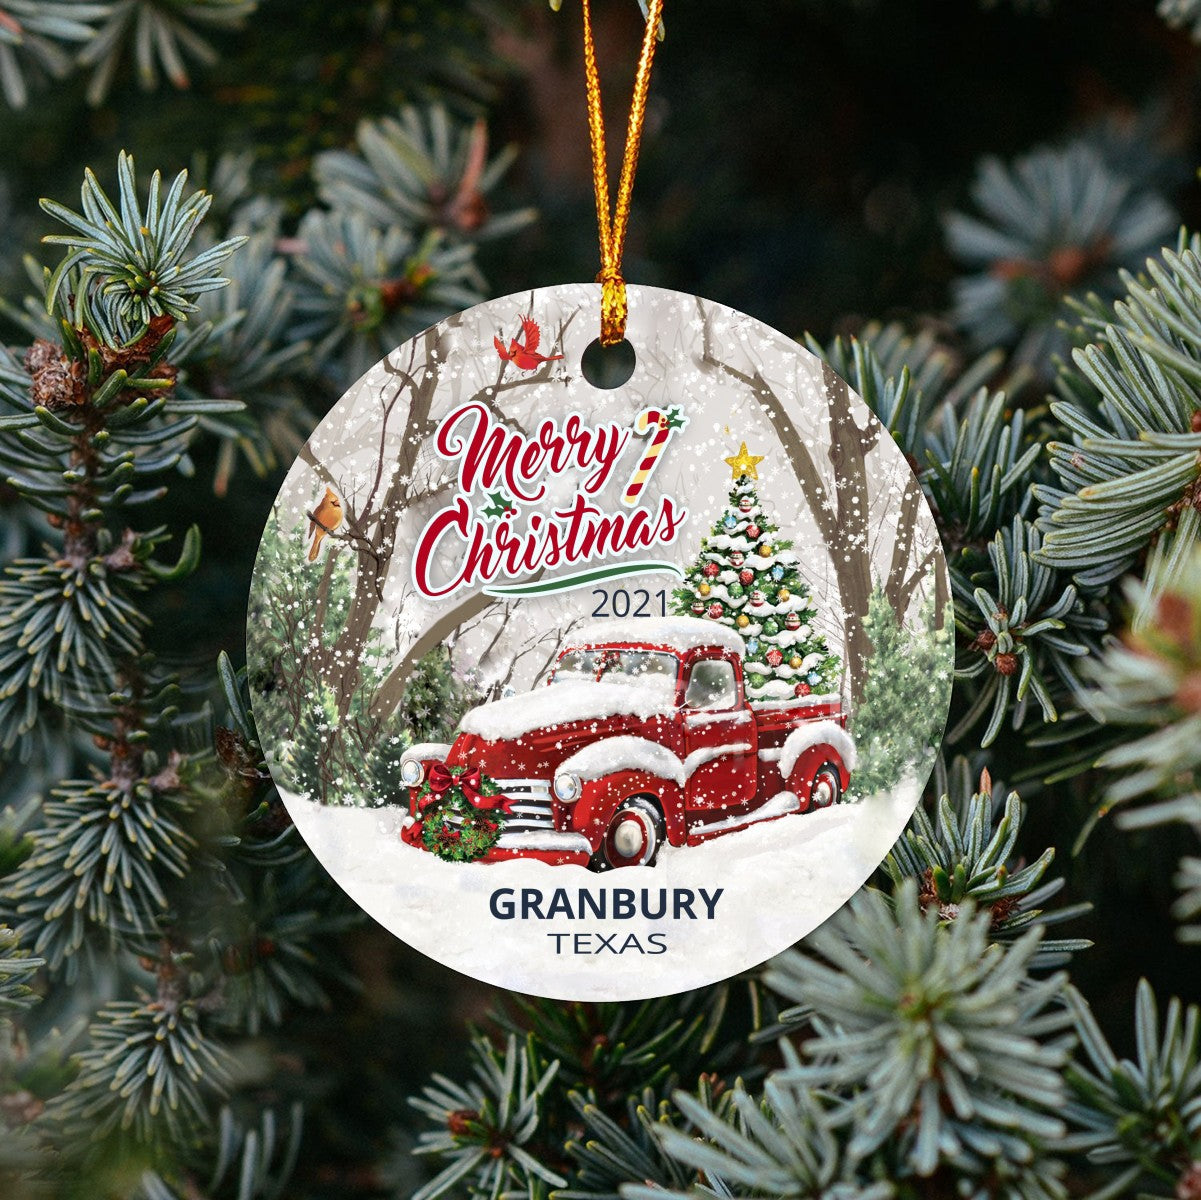 Christmas Tree Ornaments Granbury - Ornament Customize With Name City And State Granbury Texas TX - Red Truck Xmas Ornaments 3'' Plastic Gift For Family, Friend And Housewarming